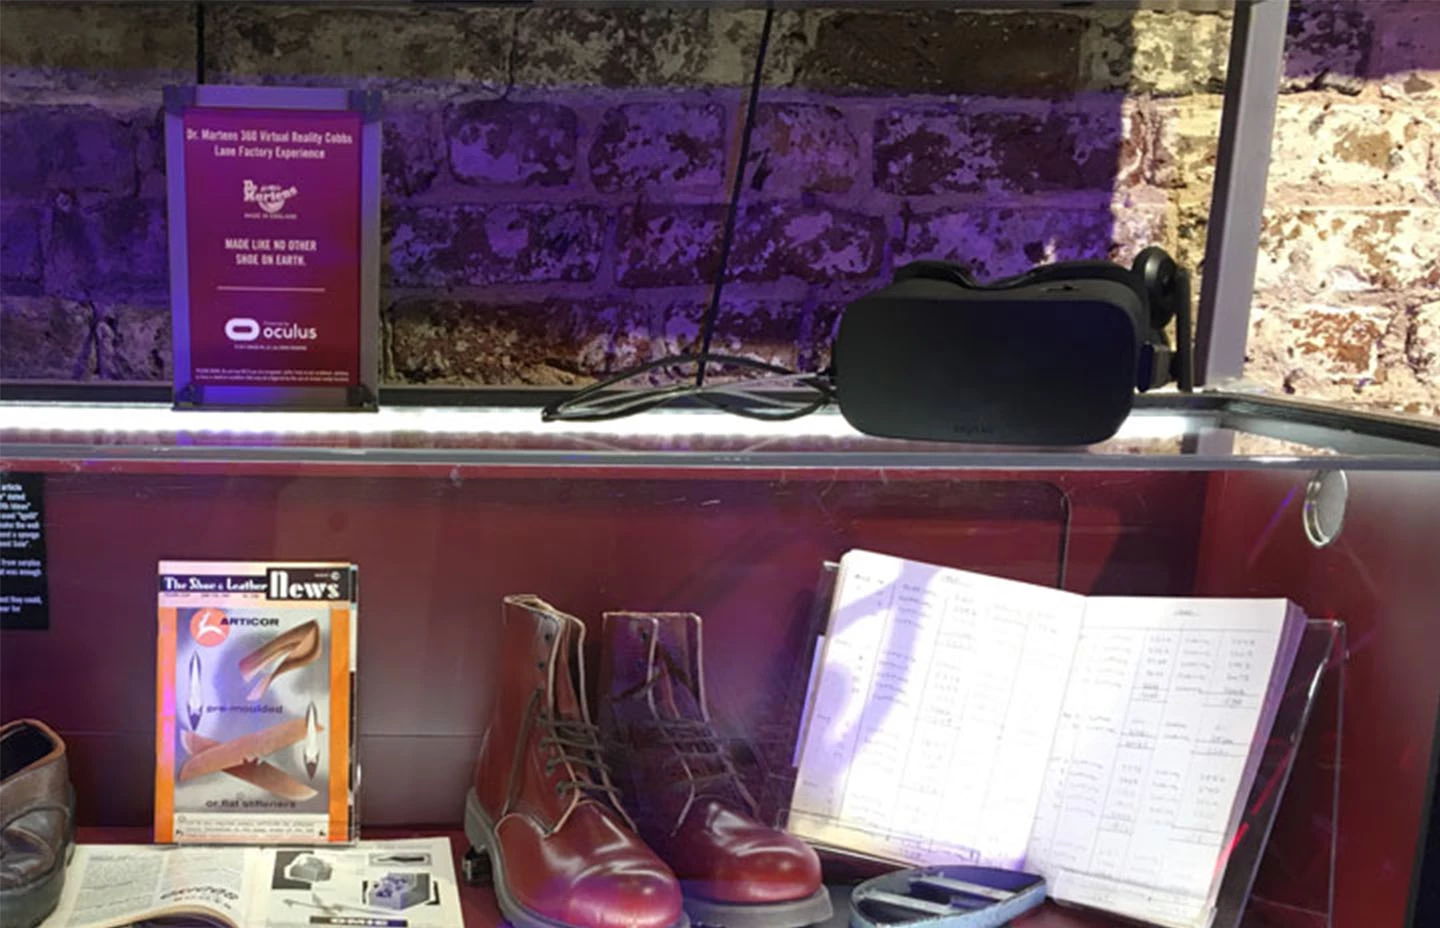 Shelves displaying Dr Martens shoes, logbook, magazines and VR headset